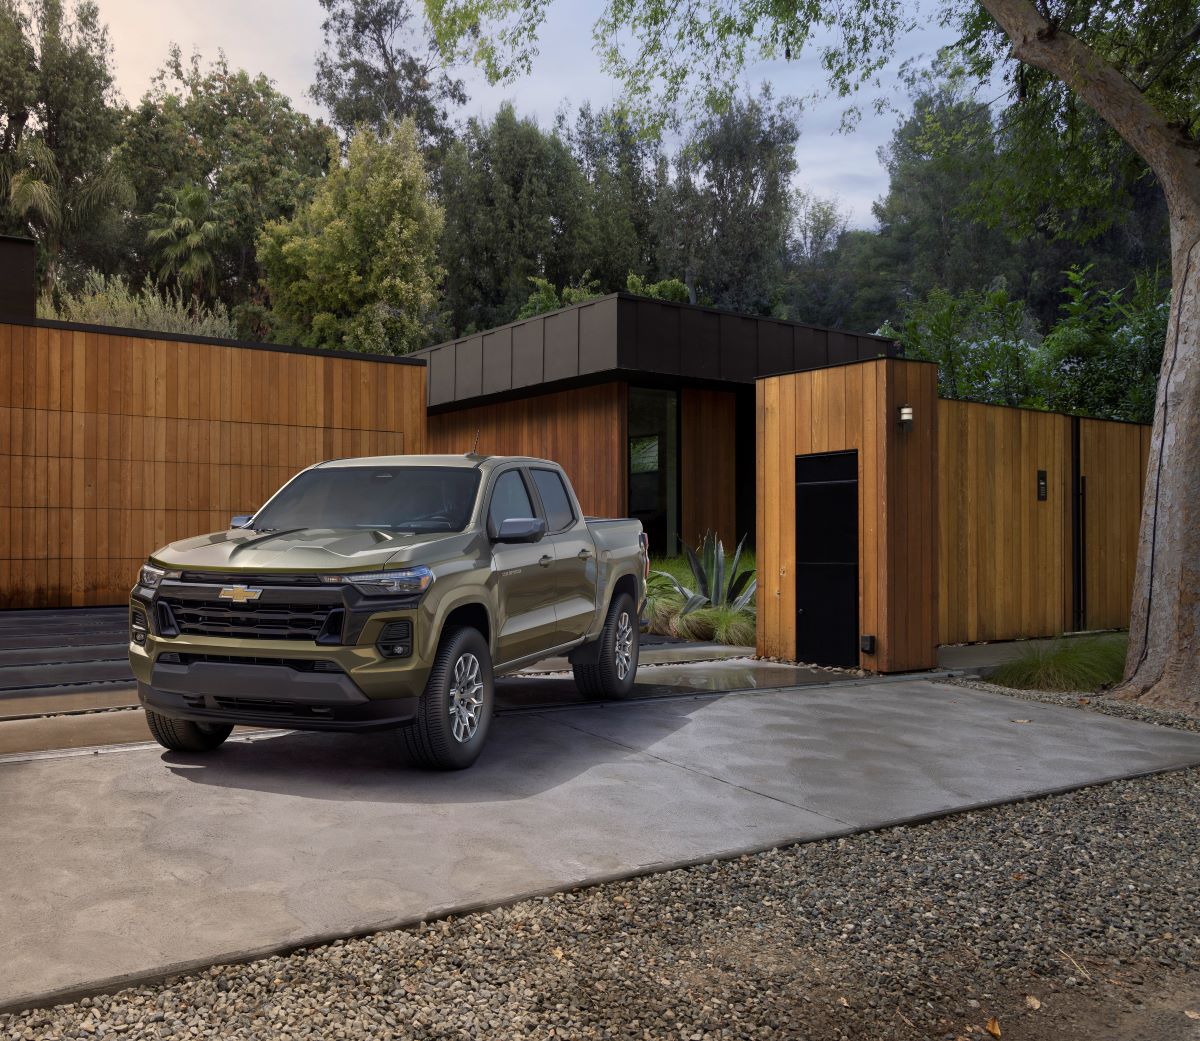 A midsize Chevy Colorado pickup truck parked in a driveway.